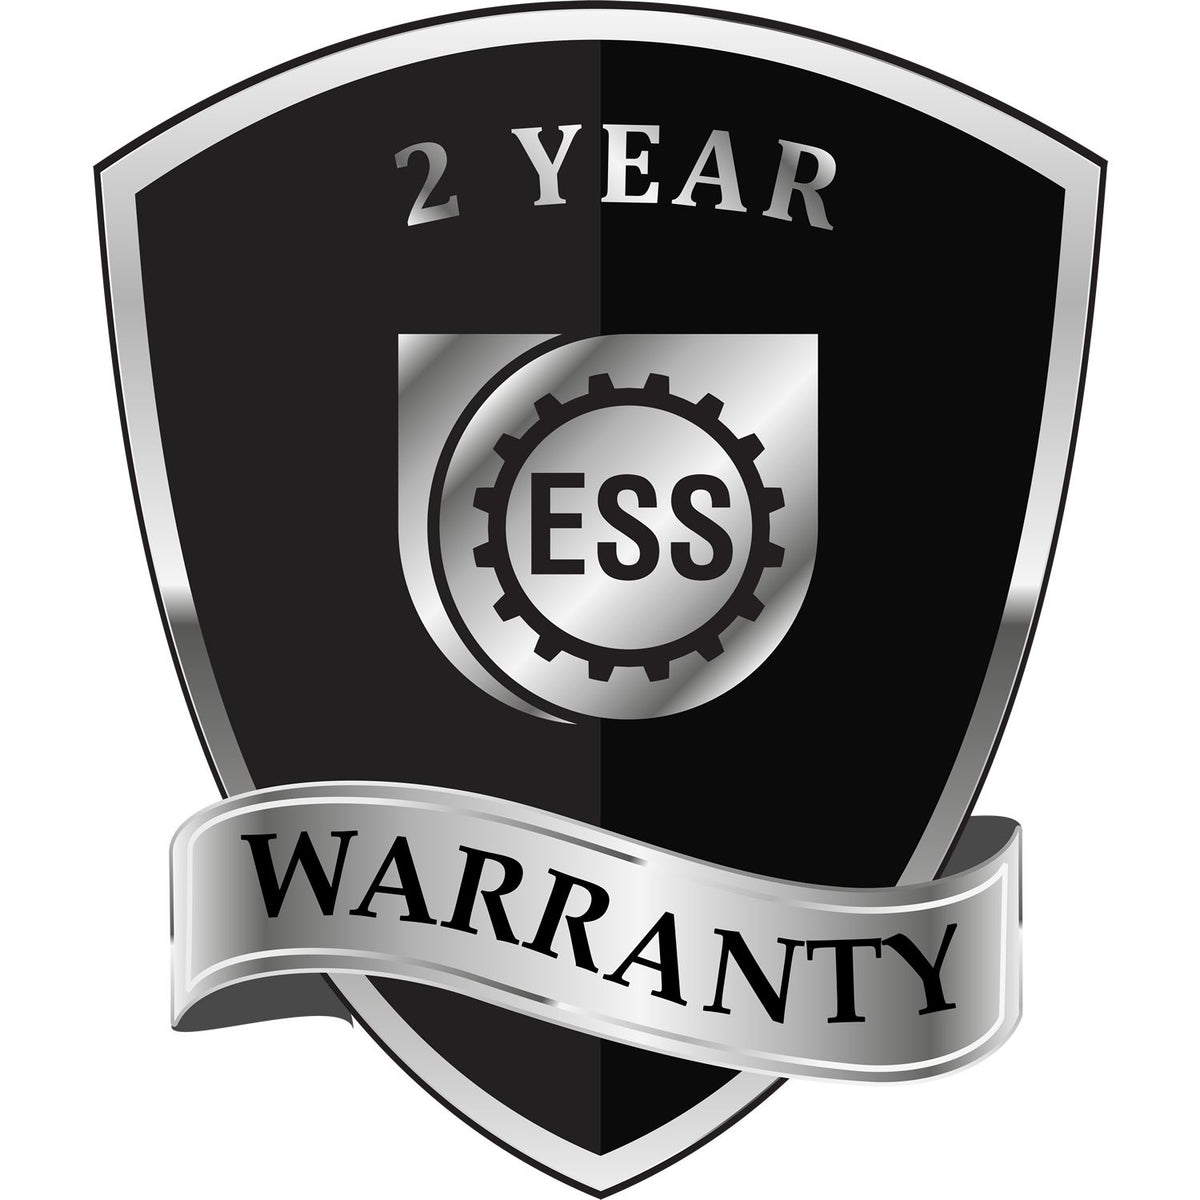 A badge or emblem showing a warranty icon for the State of Colorado Architectural Seal Embosser